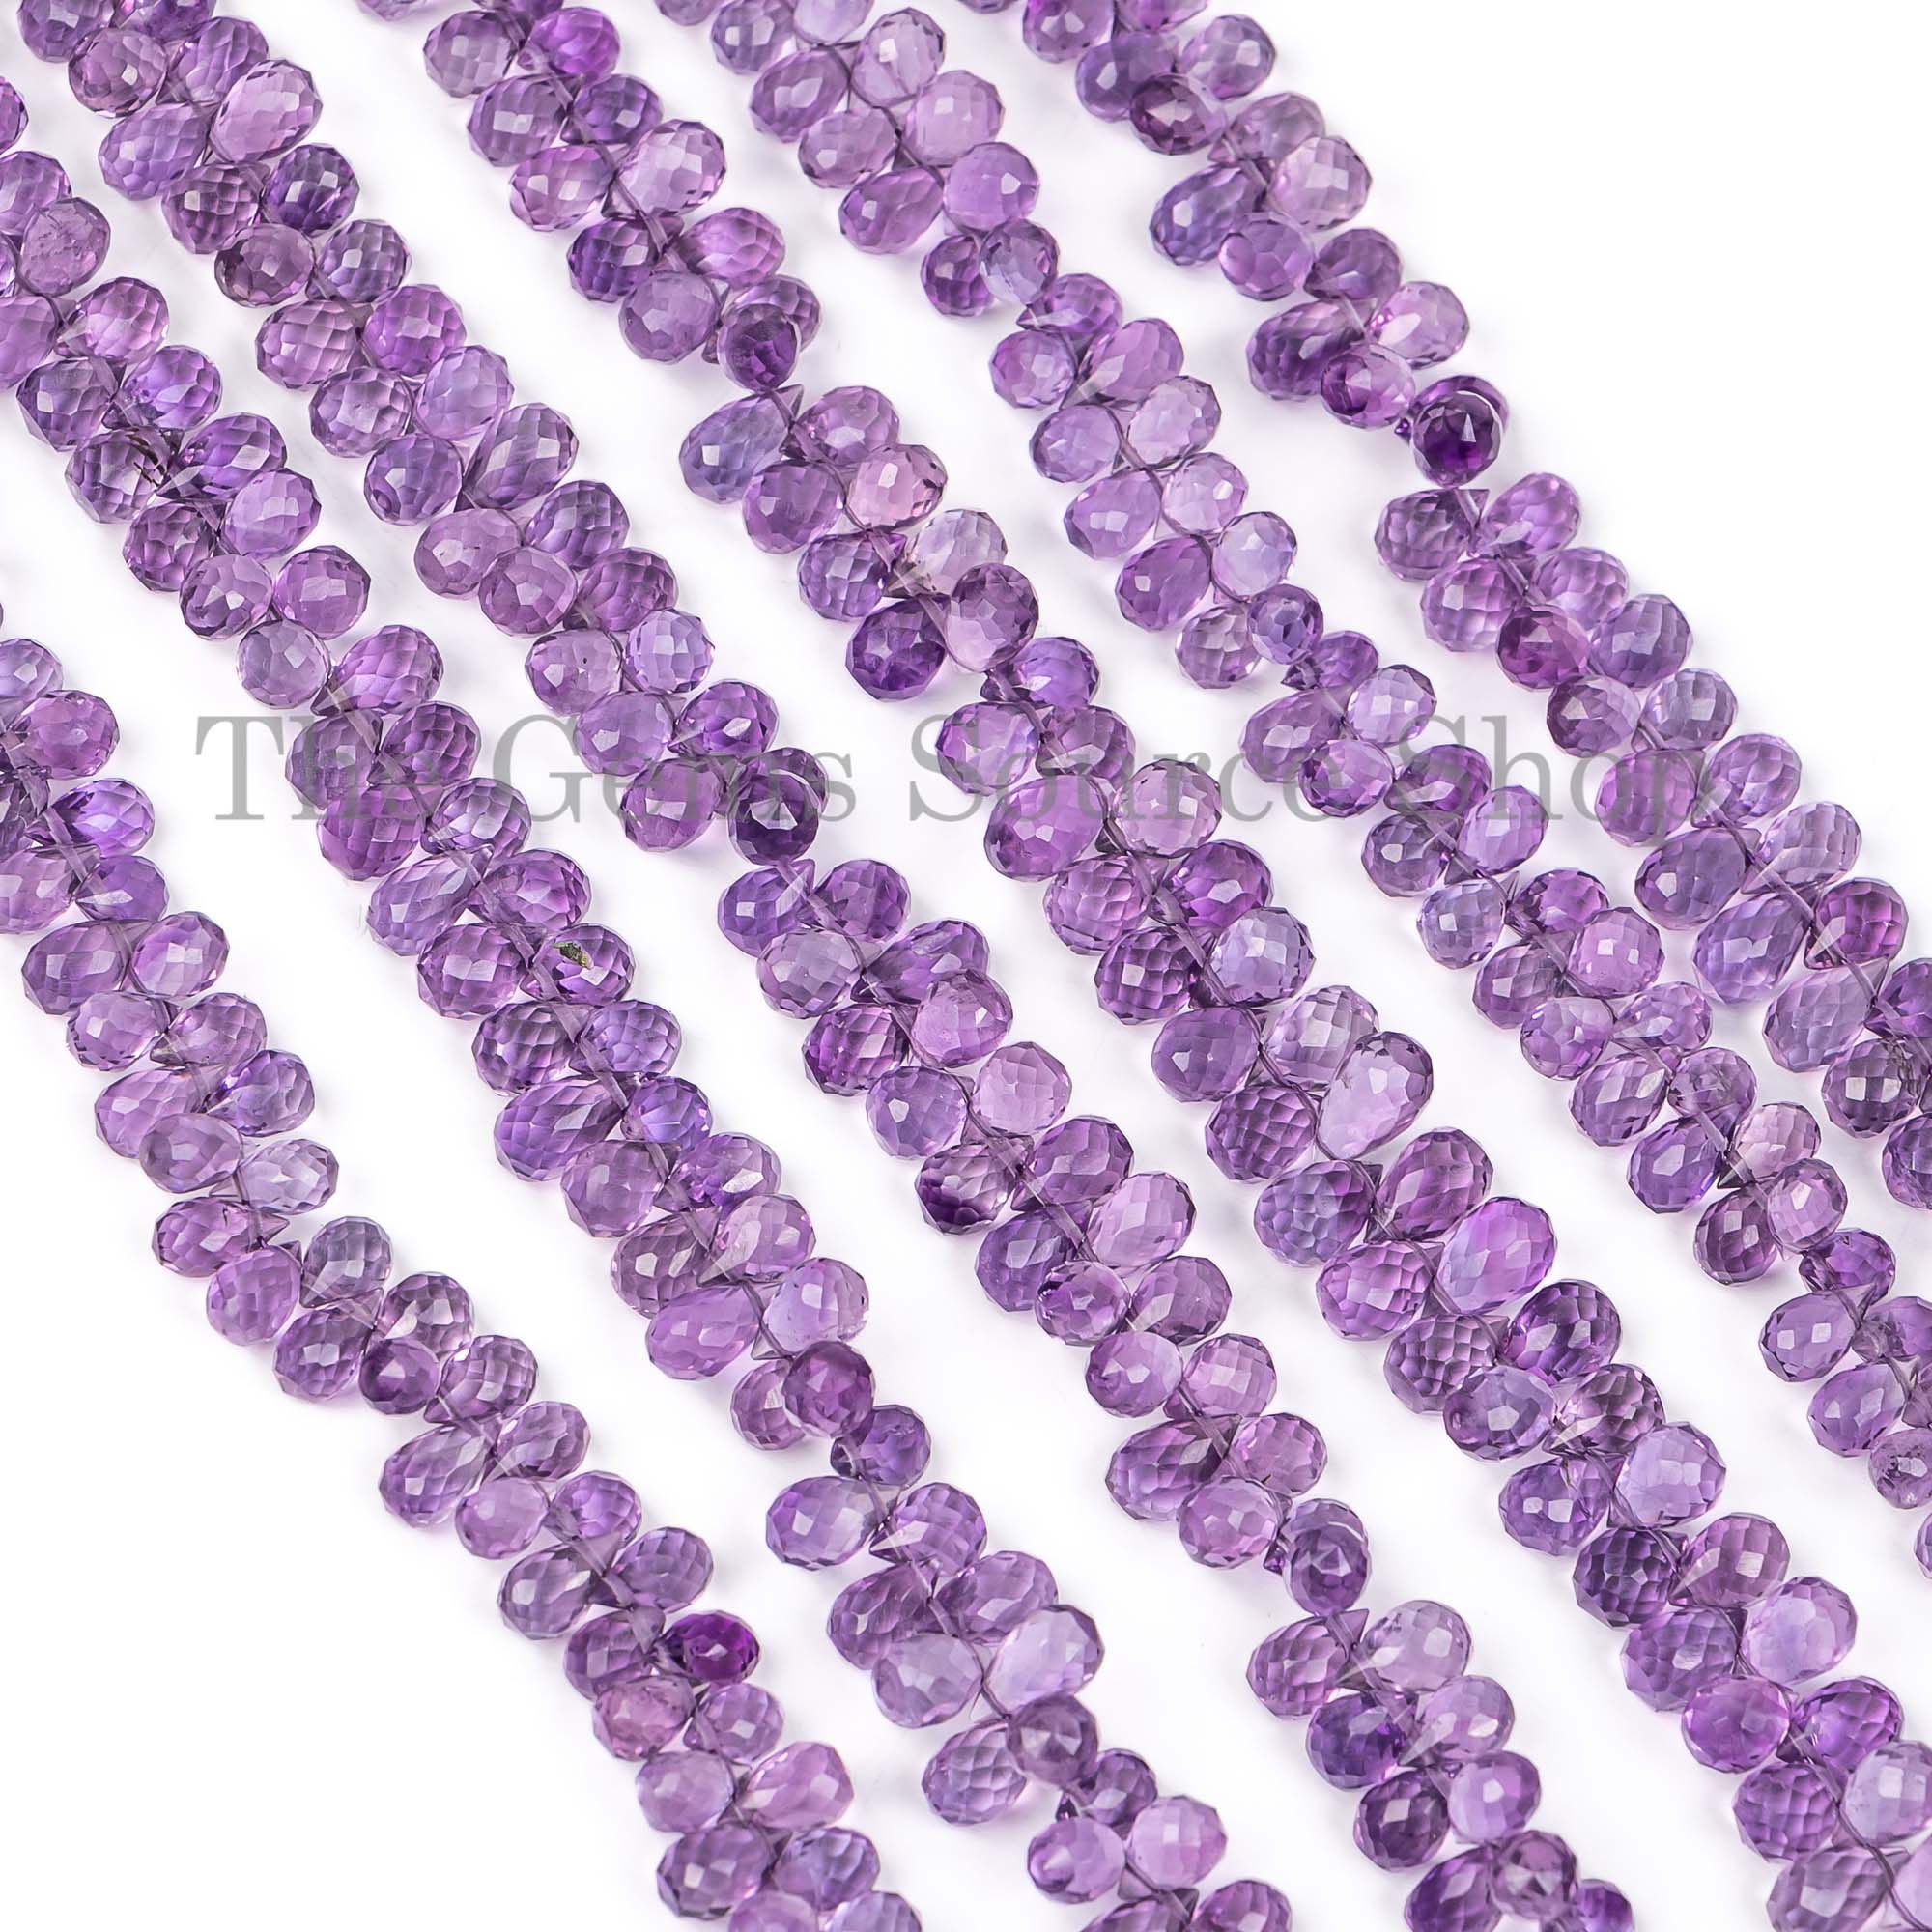 Natural Amethyst Beads, Amethyst Faceted Beads, Amethyst Drop Shape Beads, Wholesale Beads